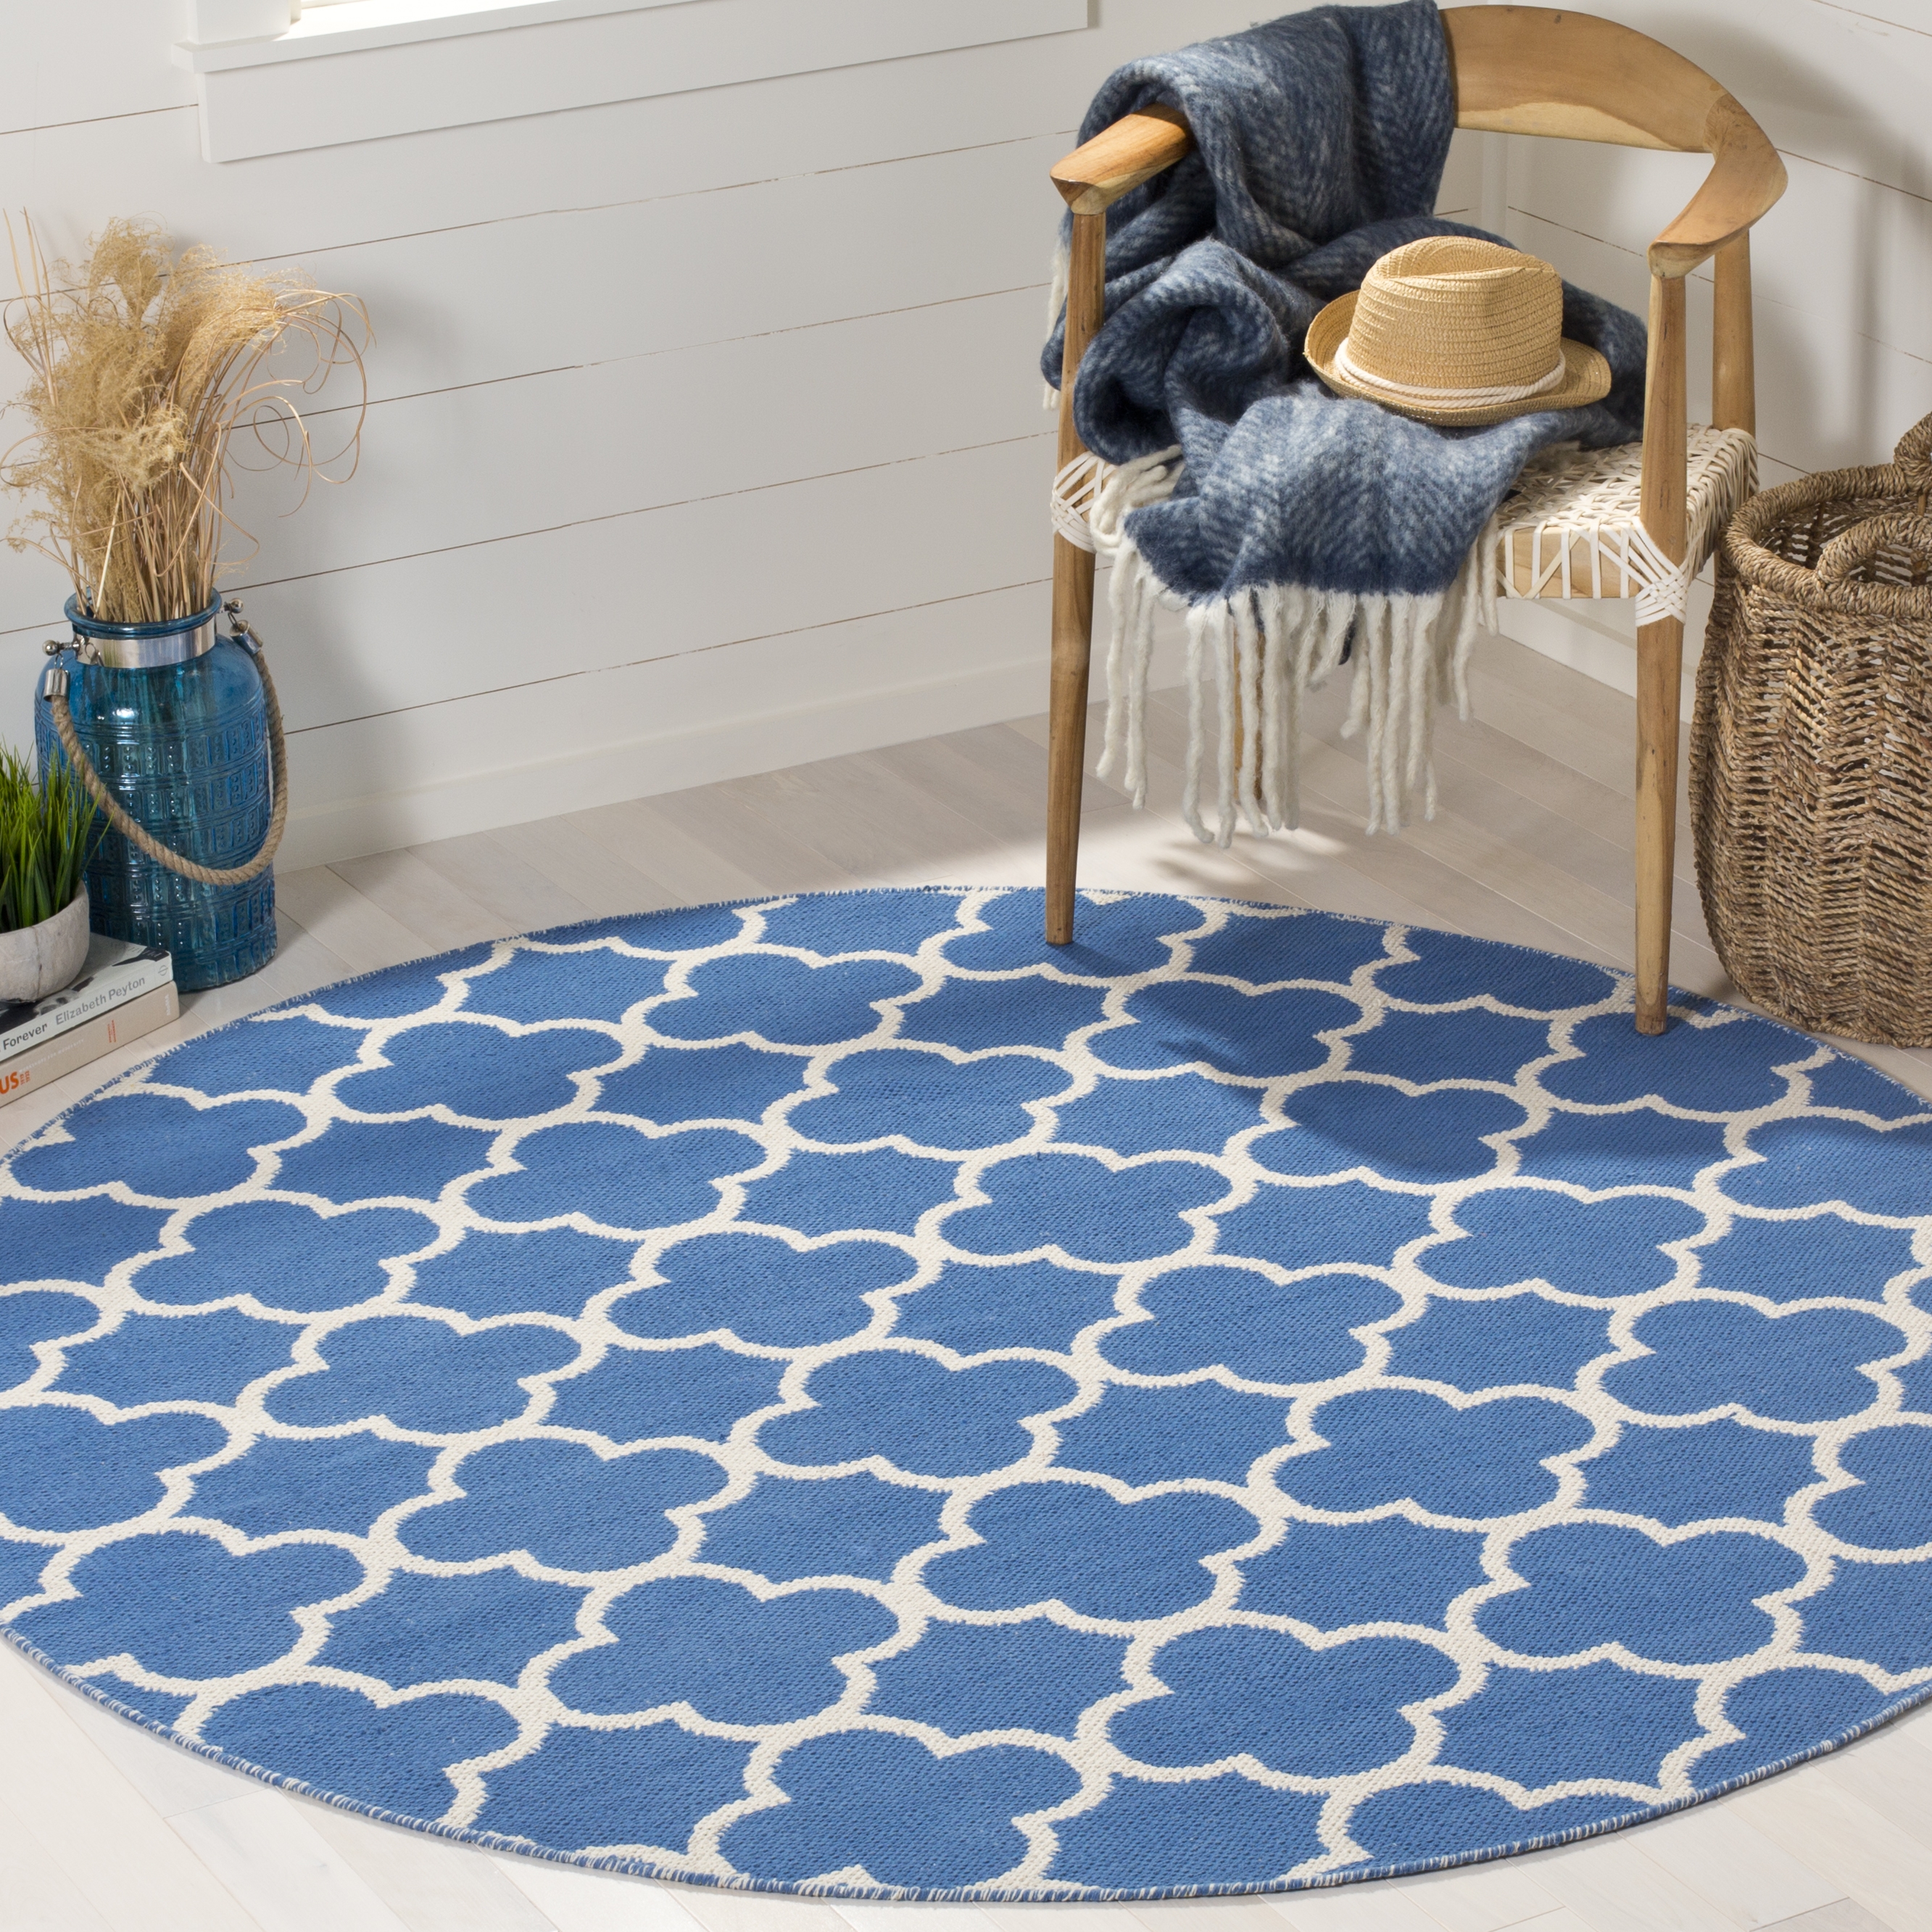 Arlo Home Hand Woven Area Rug, MTK725C, Blue/Ivory,  6' X 6' Round - Image 1